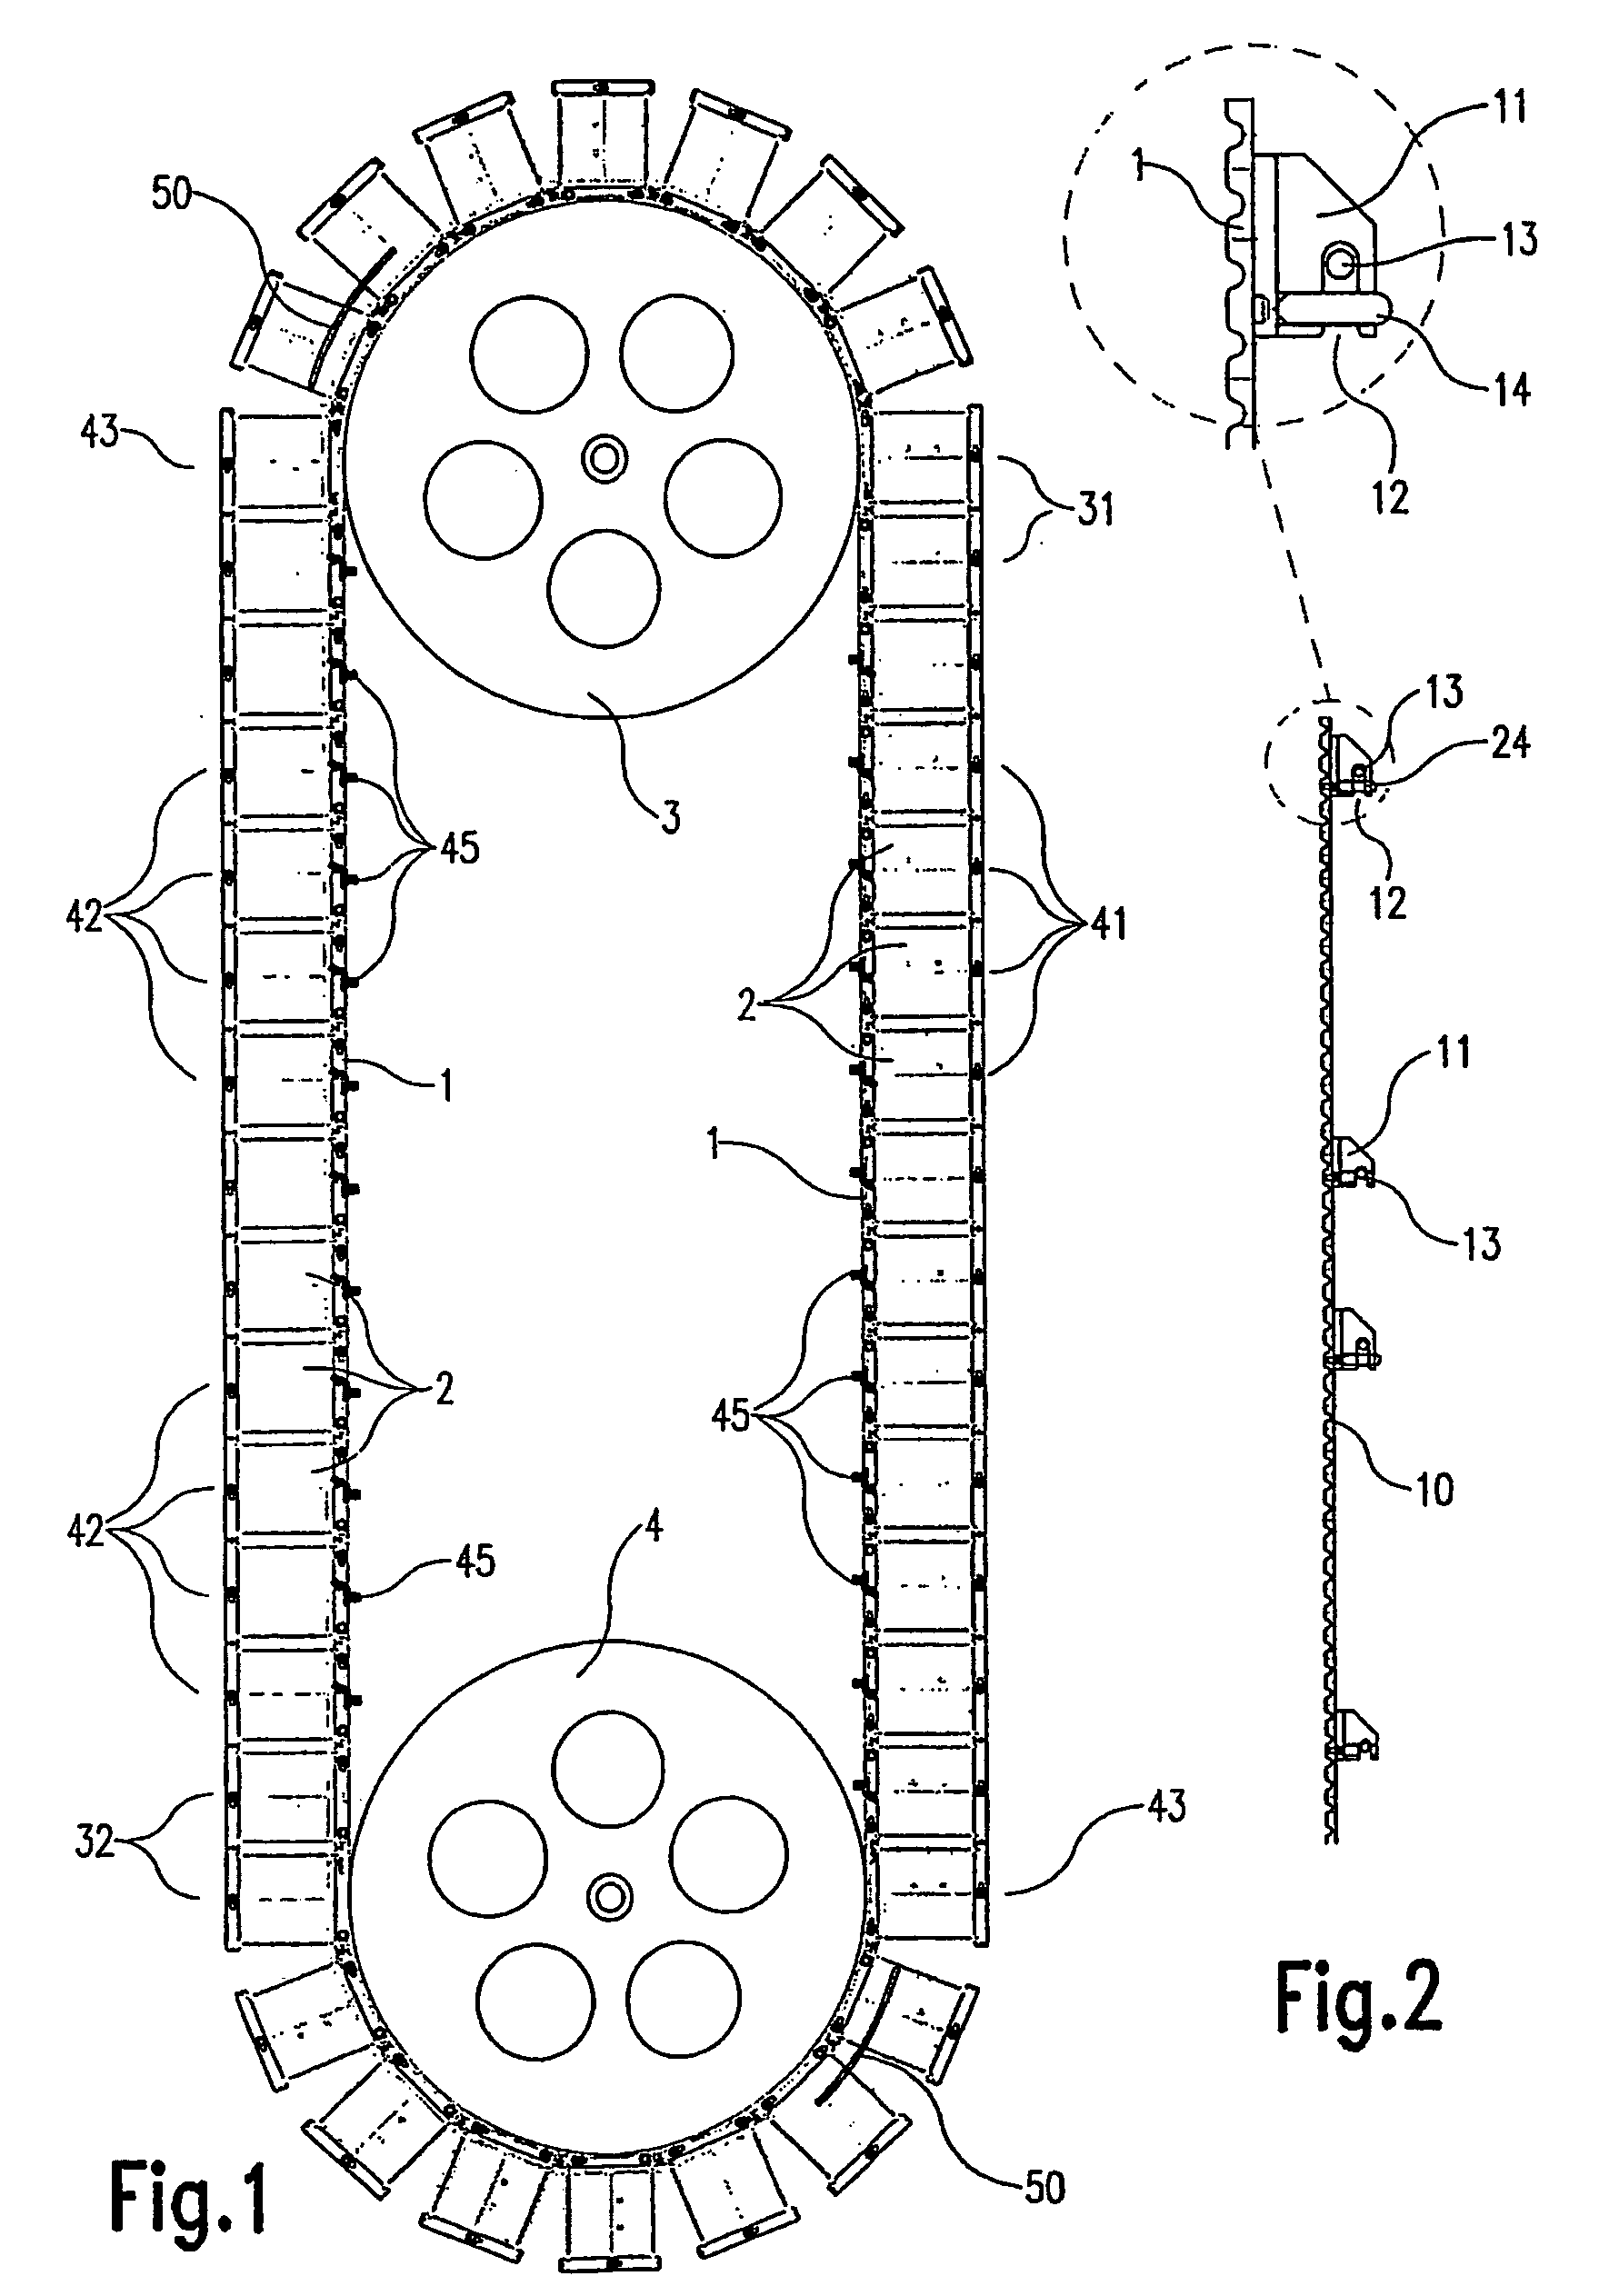 Apparatus and transport container for transport and controller discharge of a load